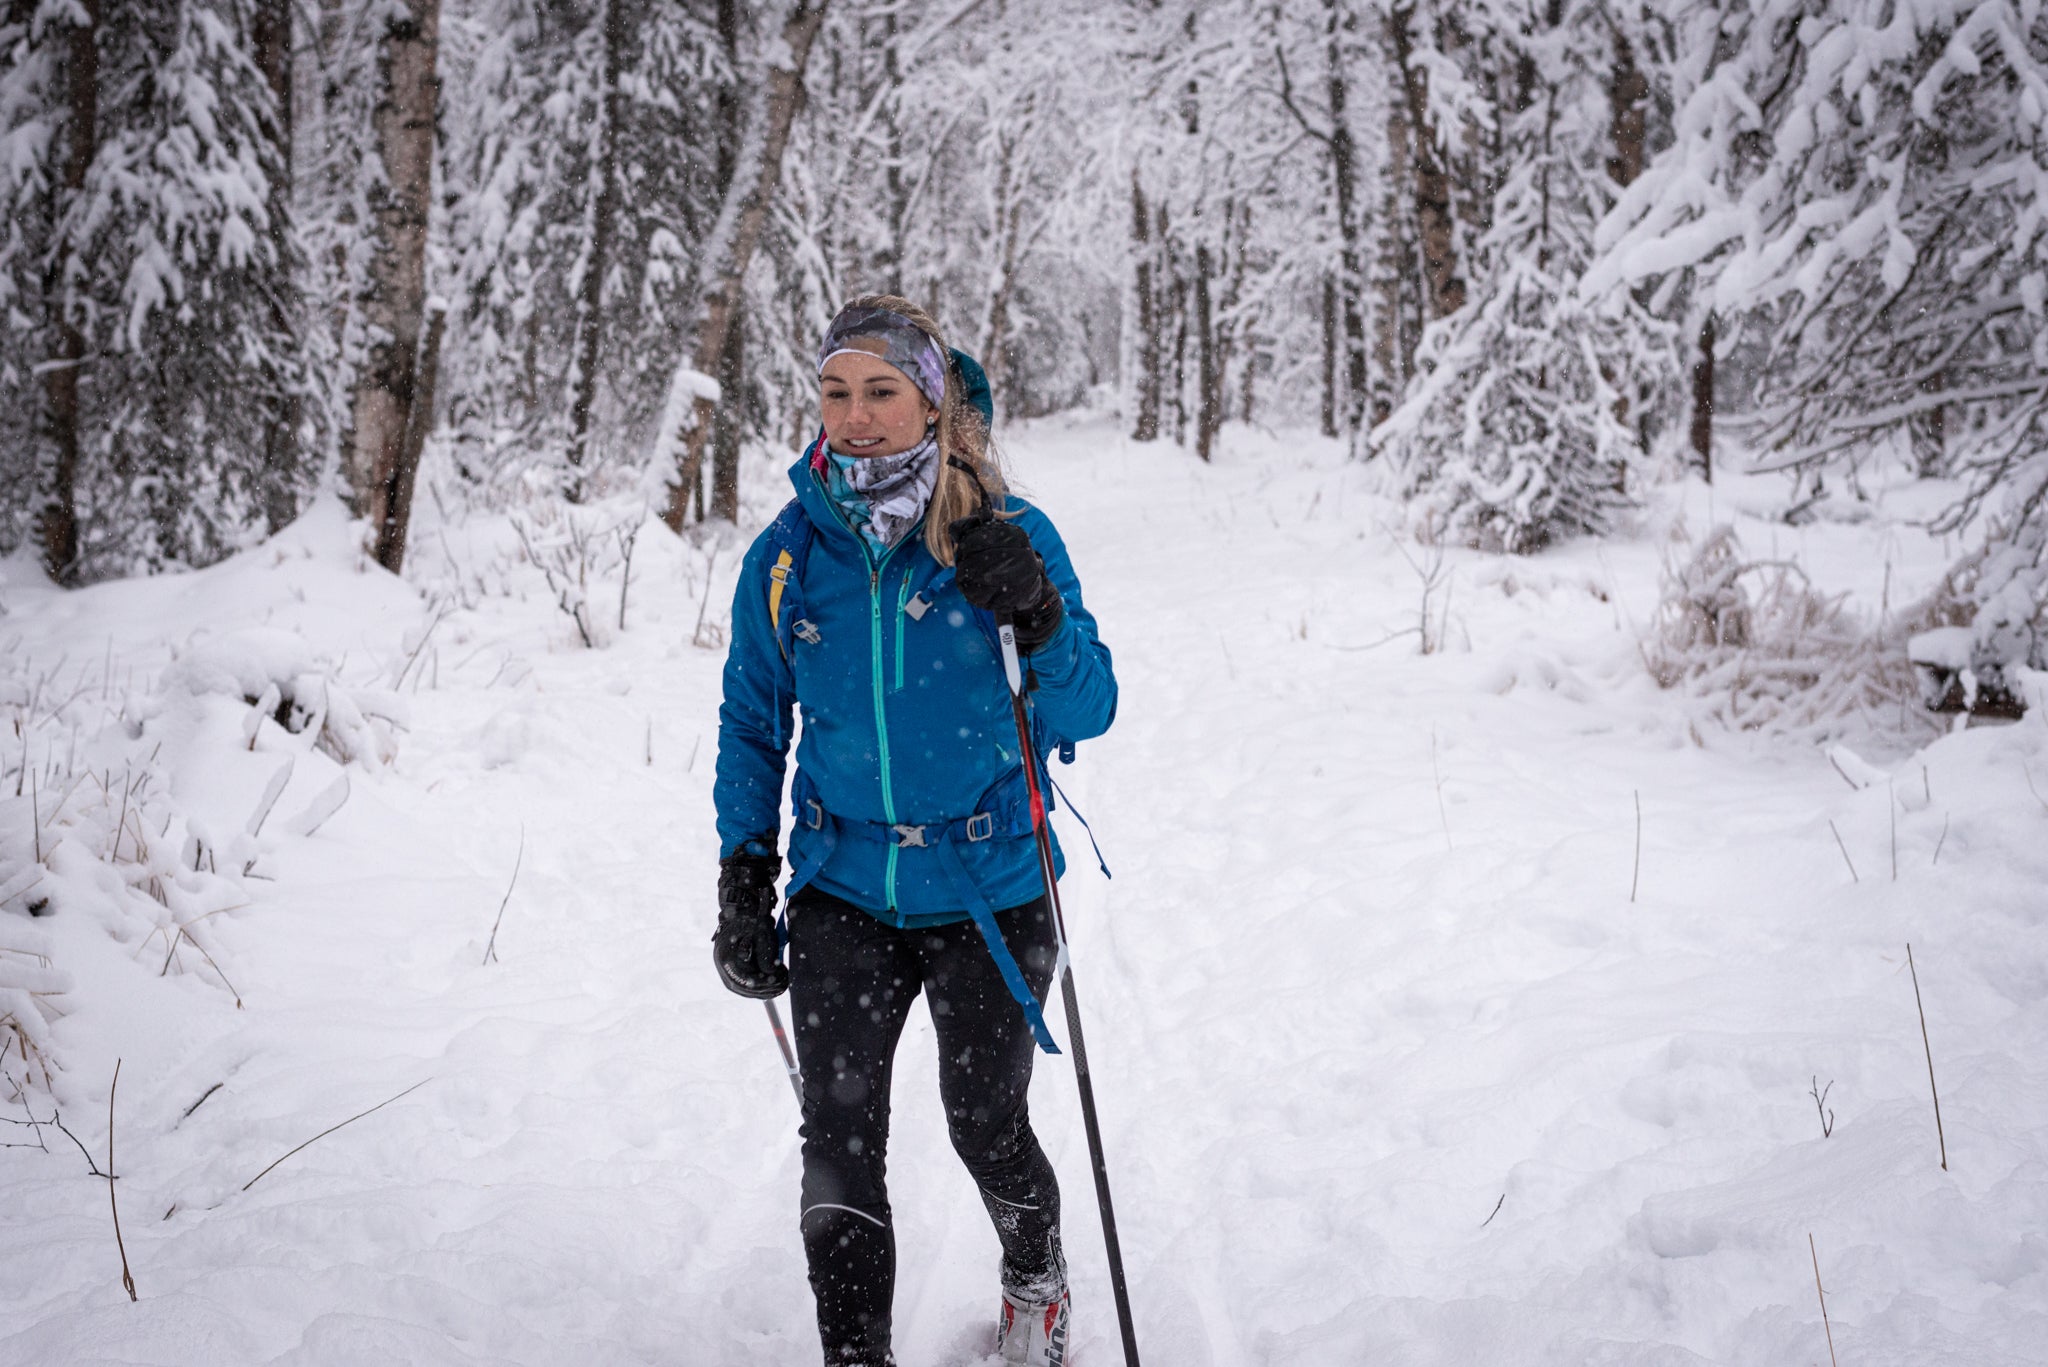 layering for variable winter weather in alaska alpine fit cross country skiing snowy trail